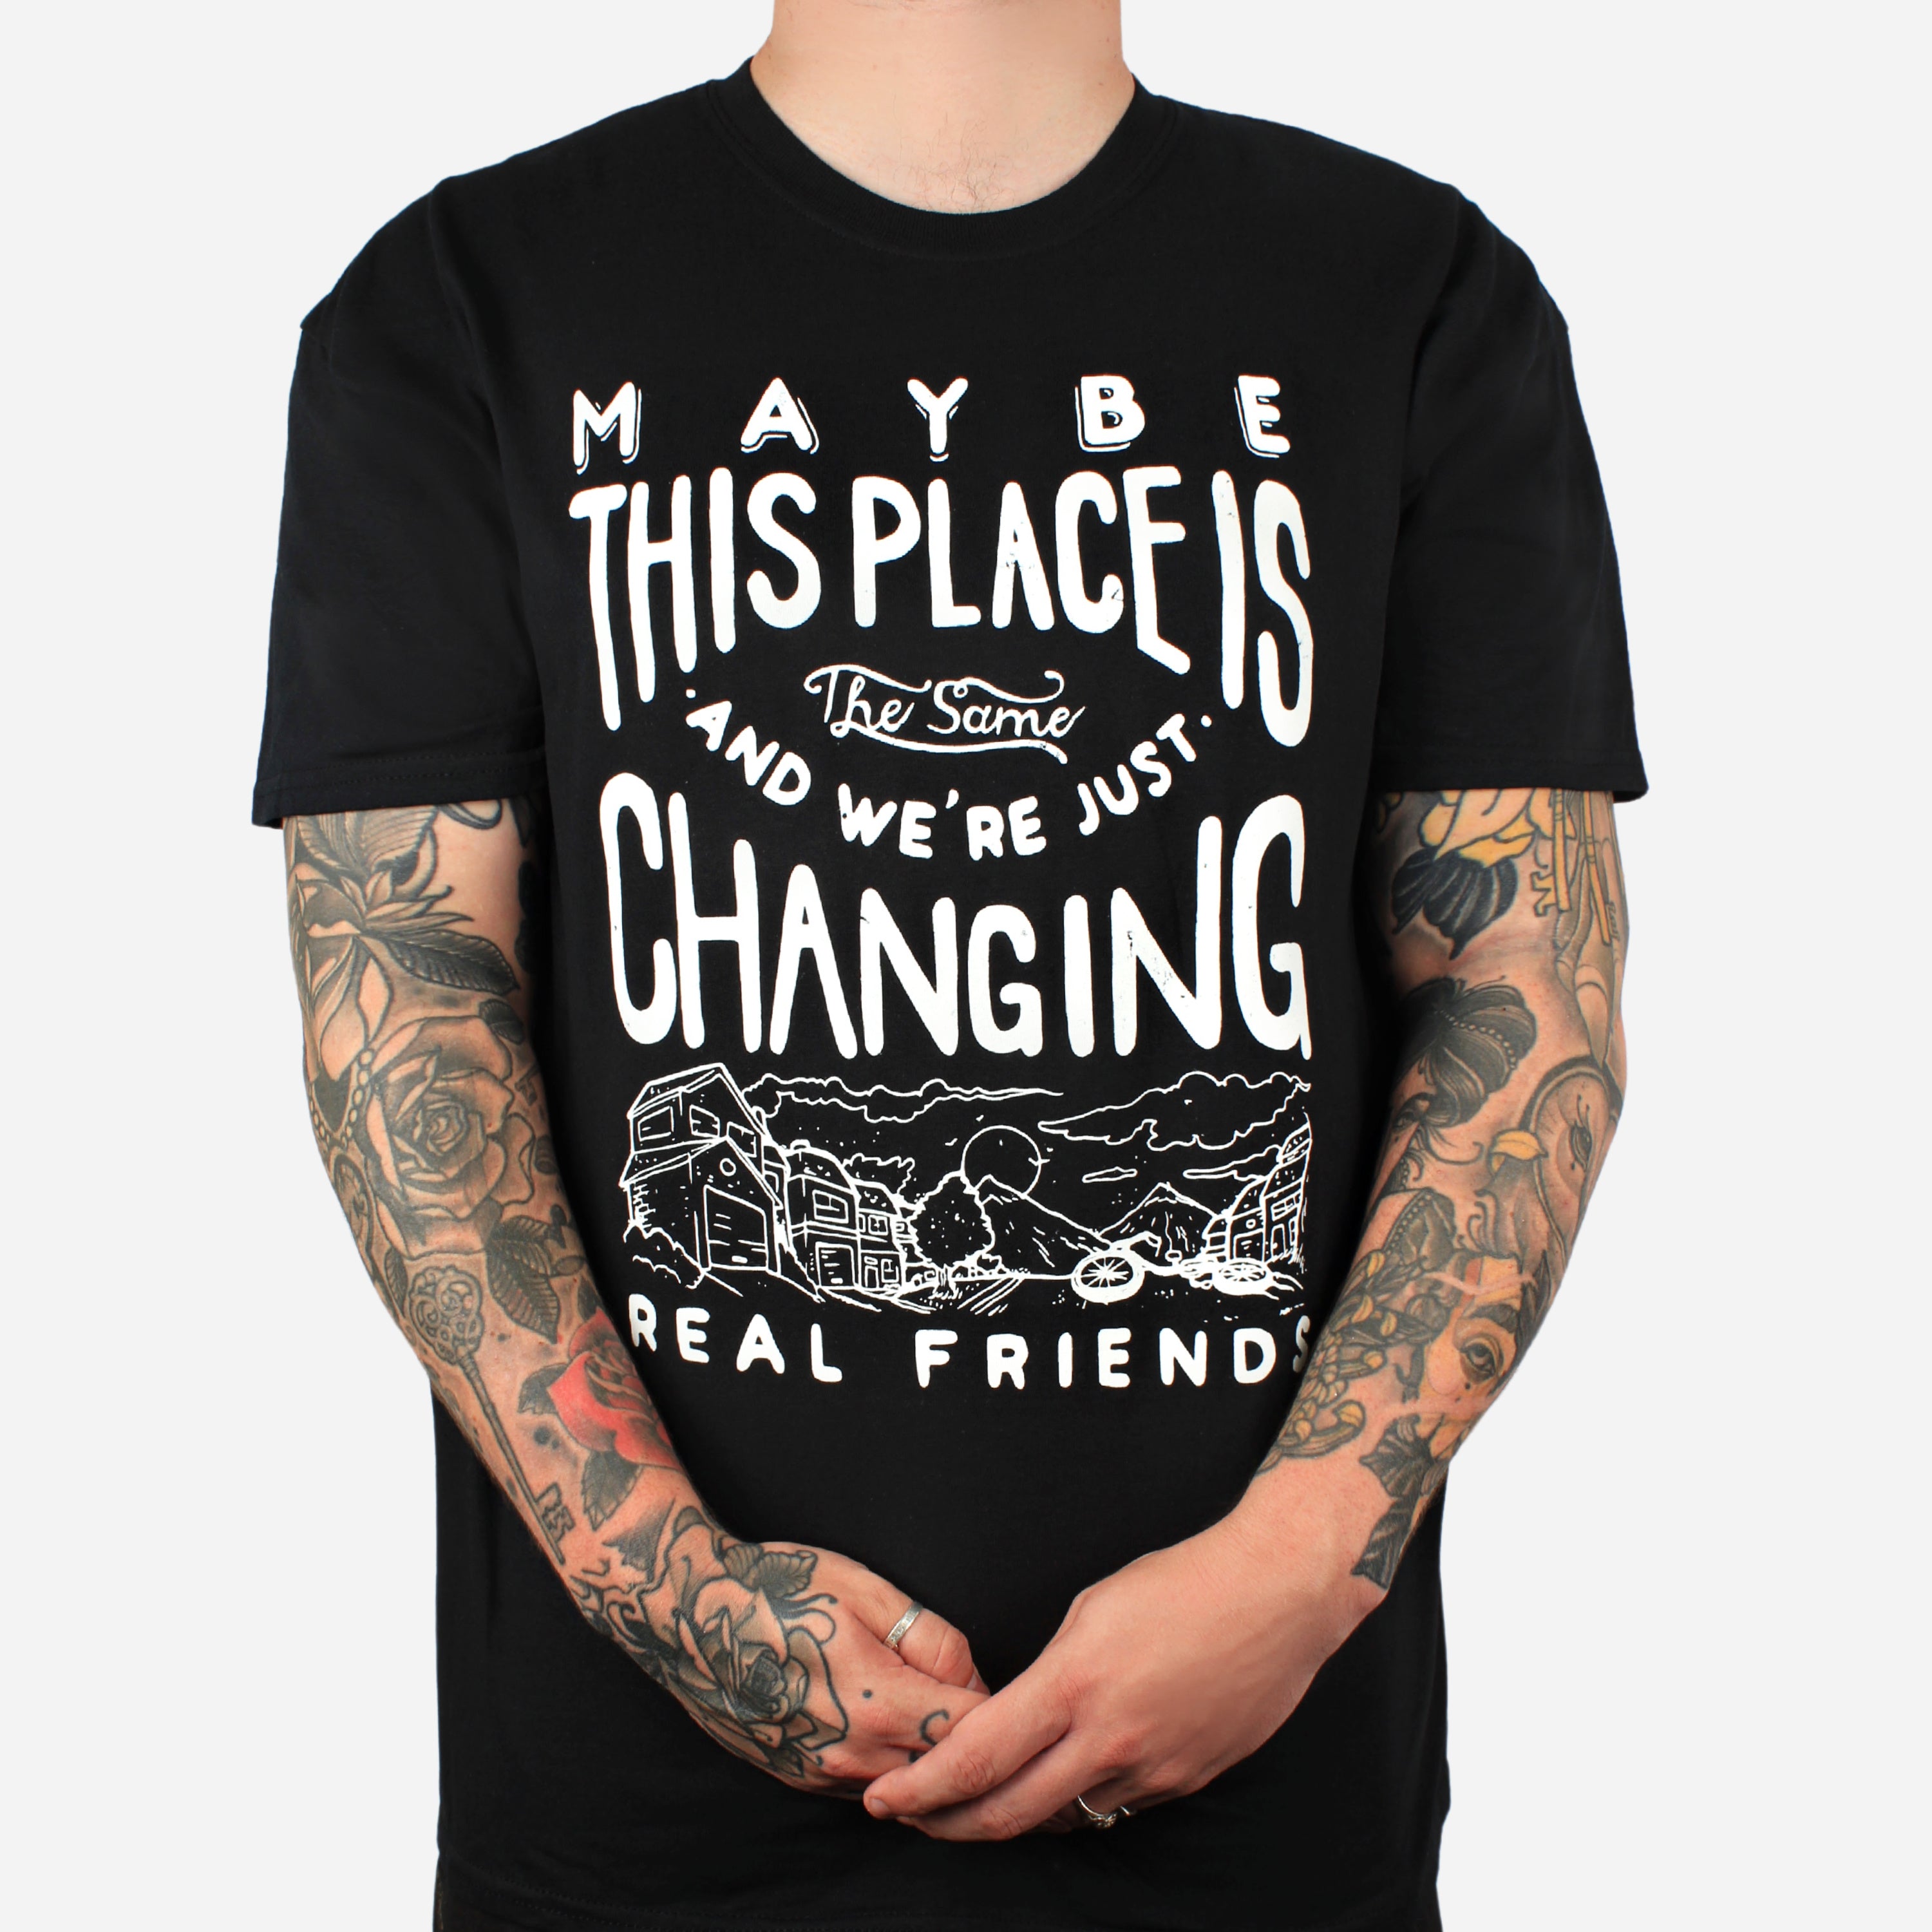 We're Just Changing T-Shirt